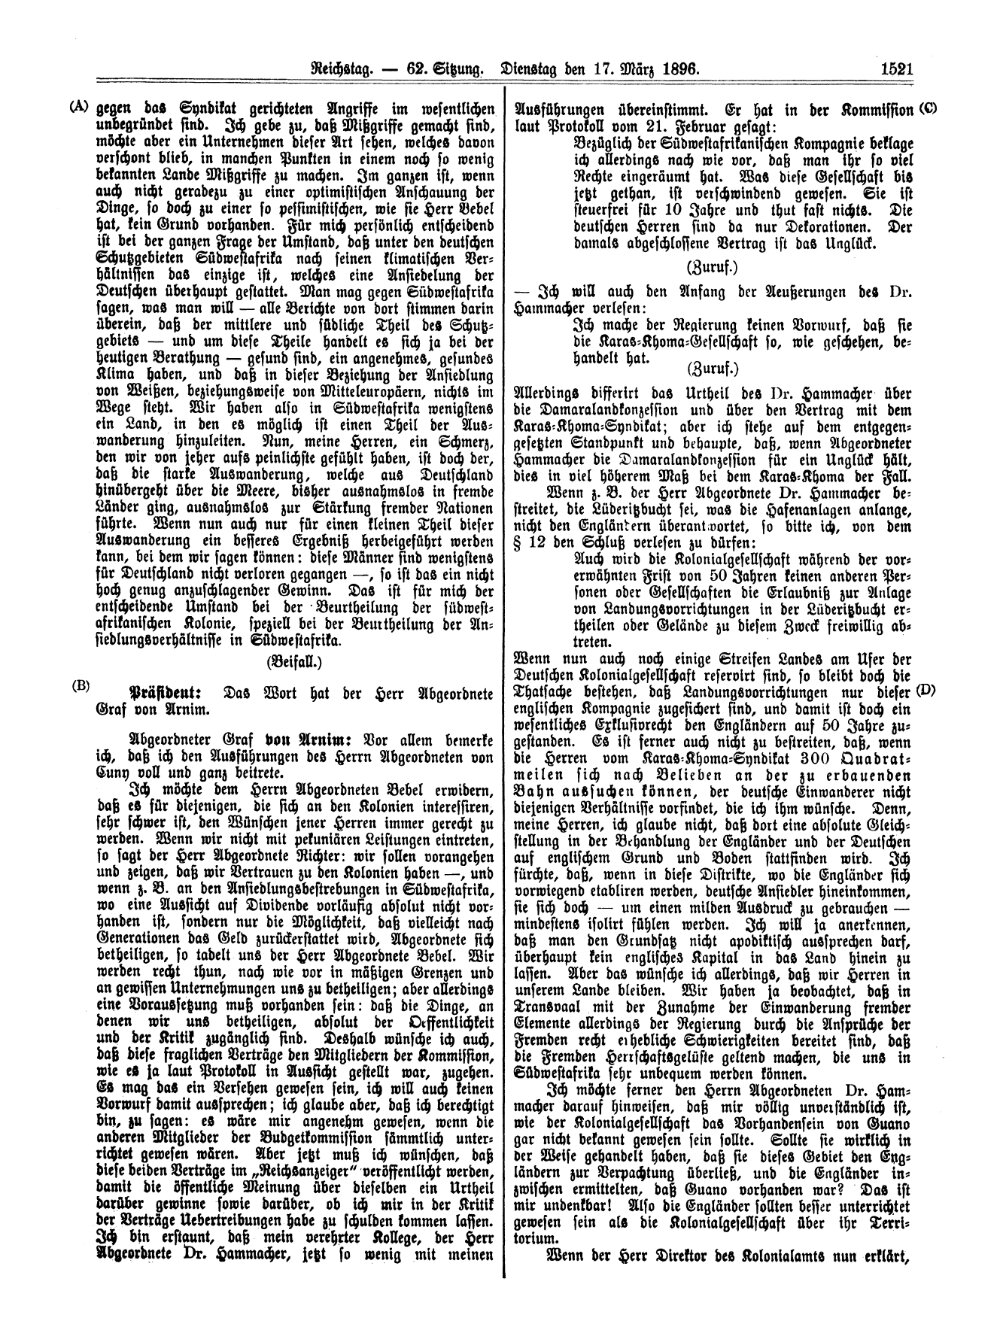 Scan of page 1521